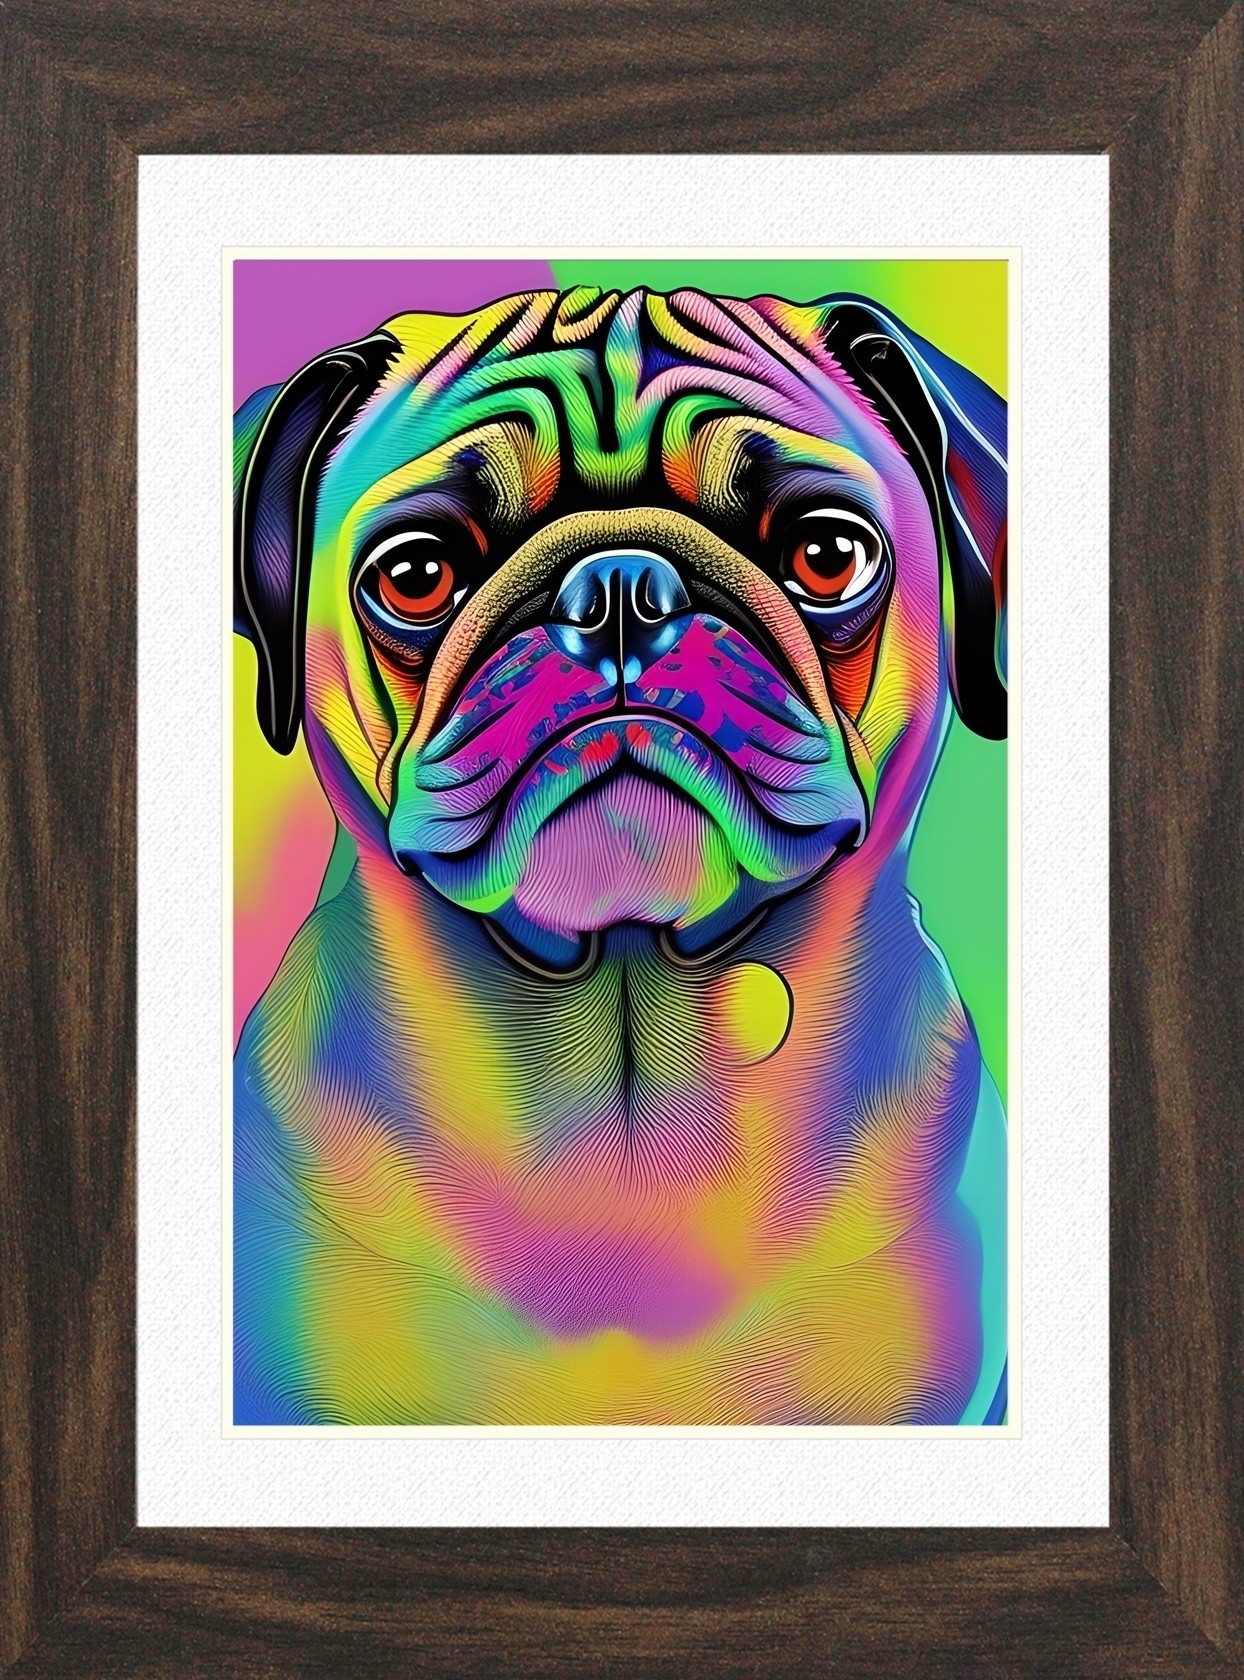 Pug Dog Picture Framed Colourful Abstract Art (30cm x 25cm Walnut Frame)